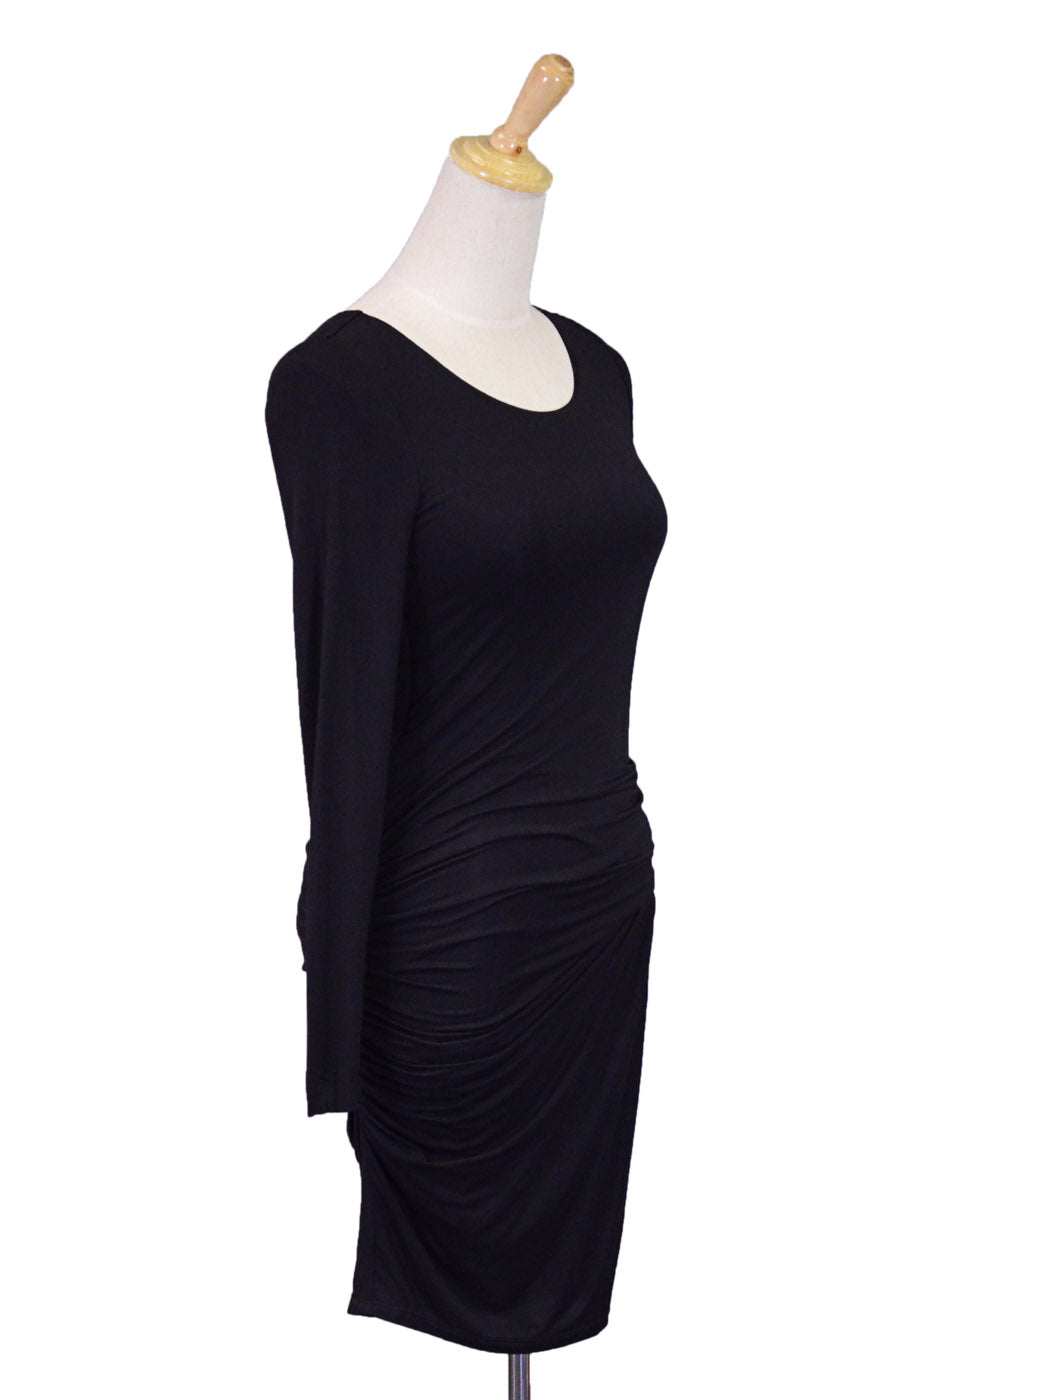 Ligali Black Long Sleeved Gathered Body Con Dress With Faux Leather Panel - ALILANG.COM